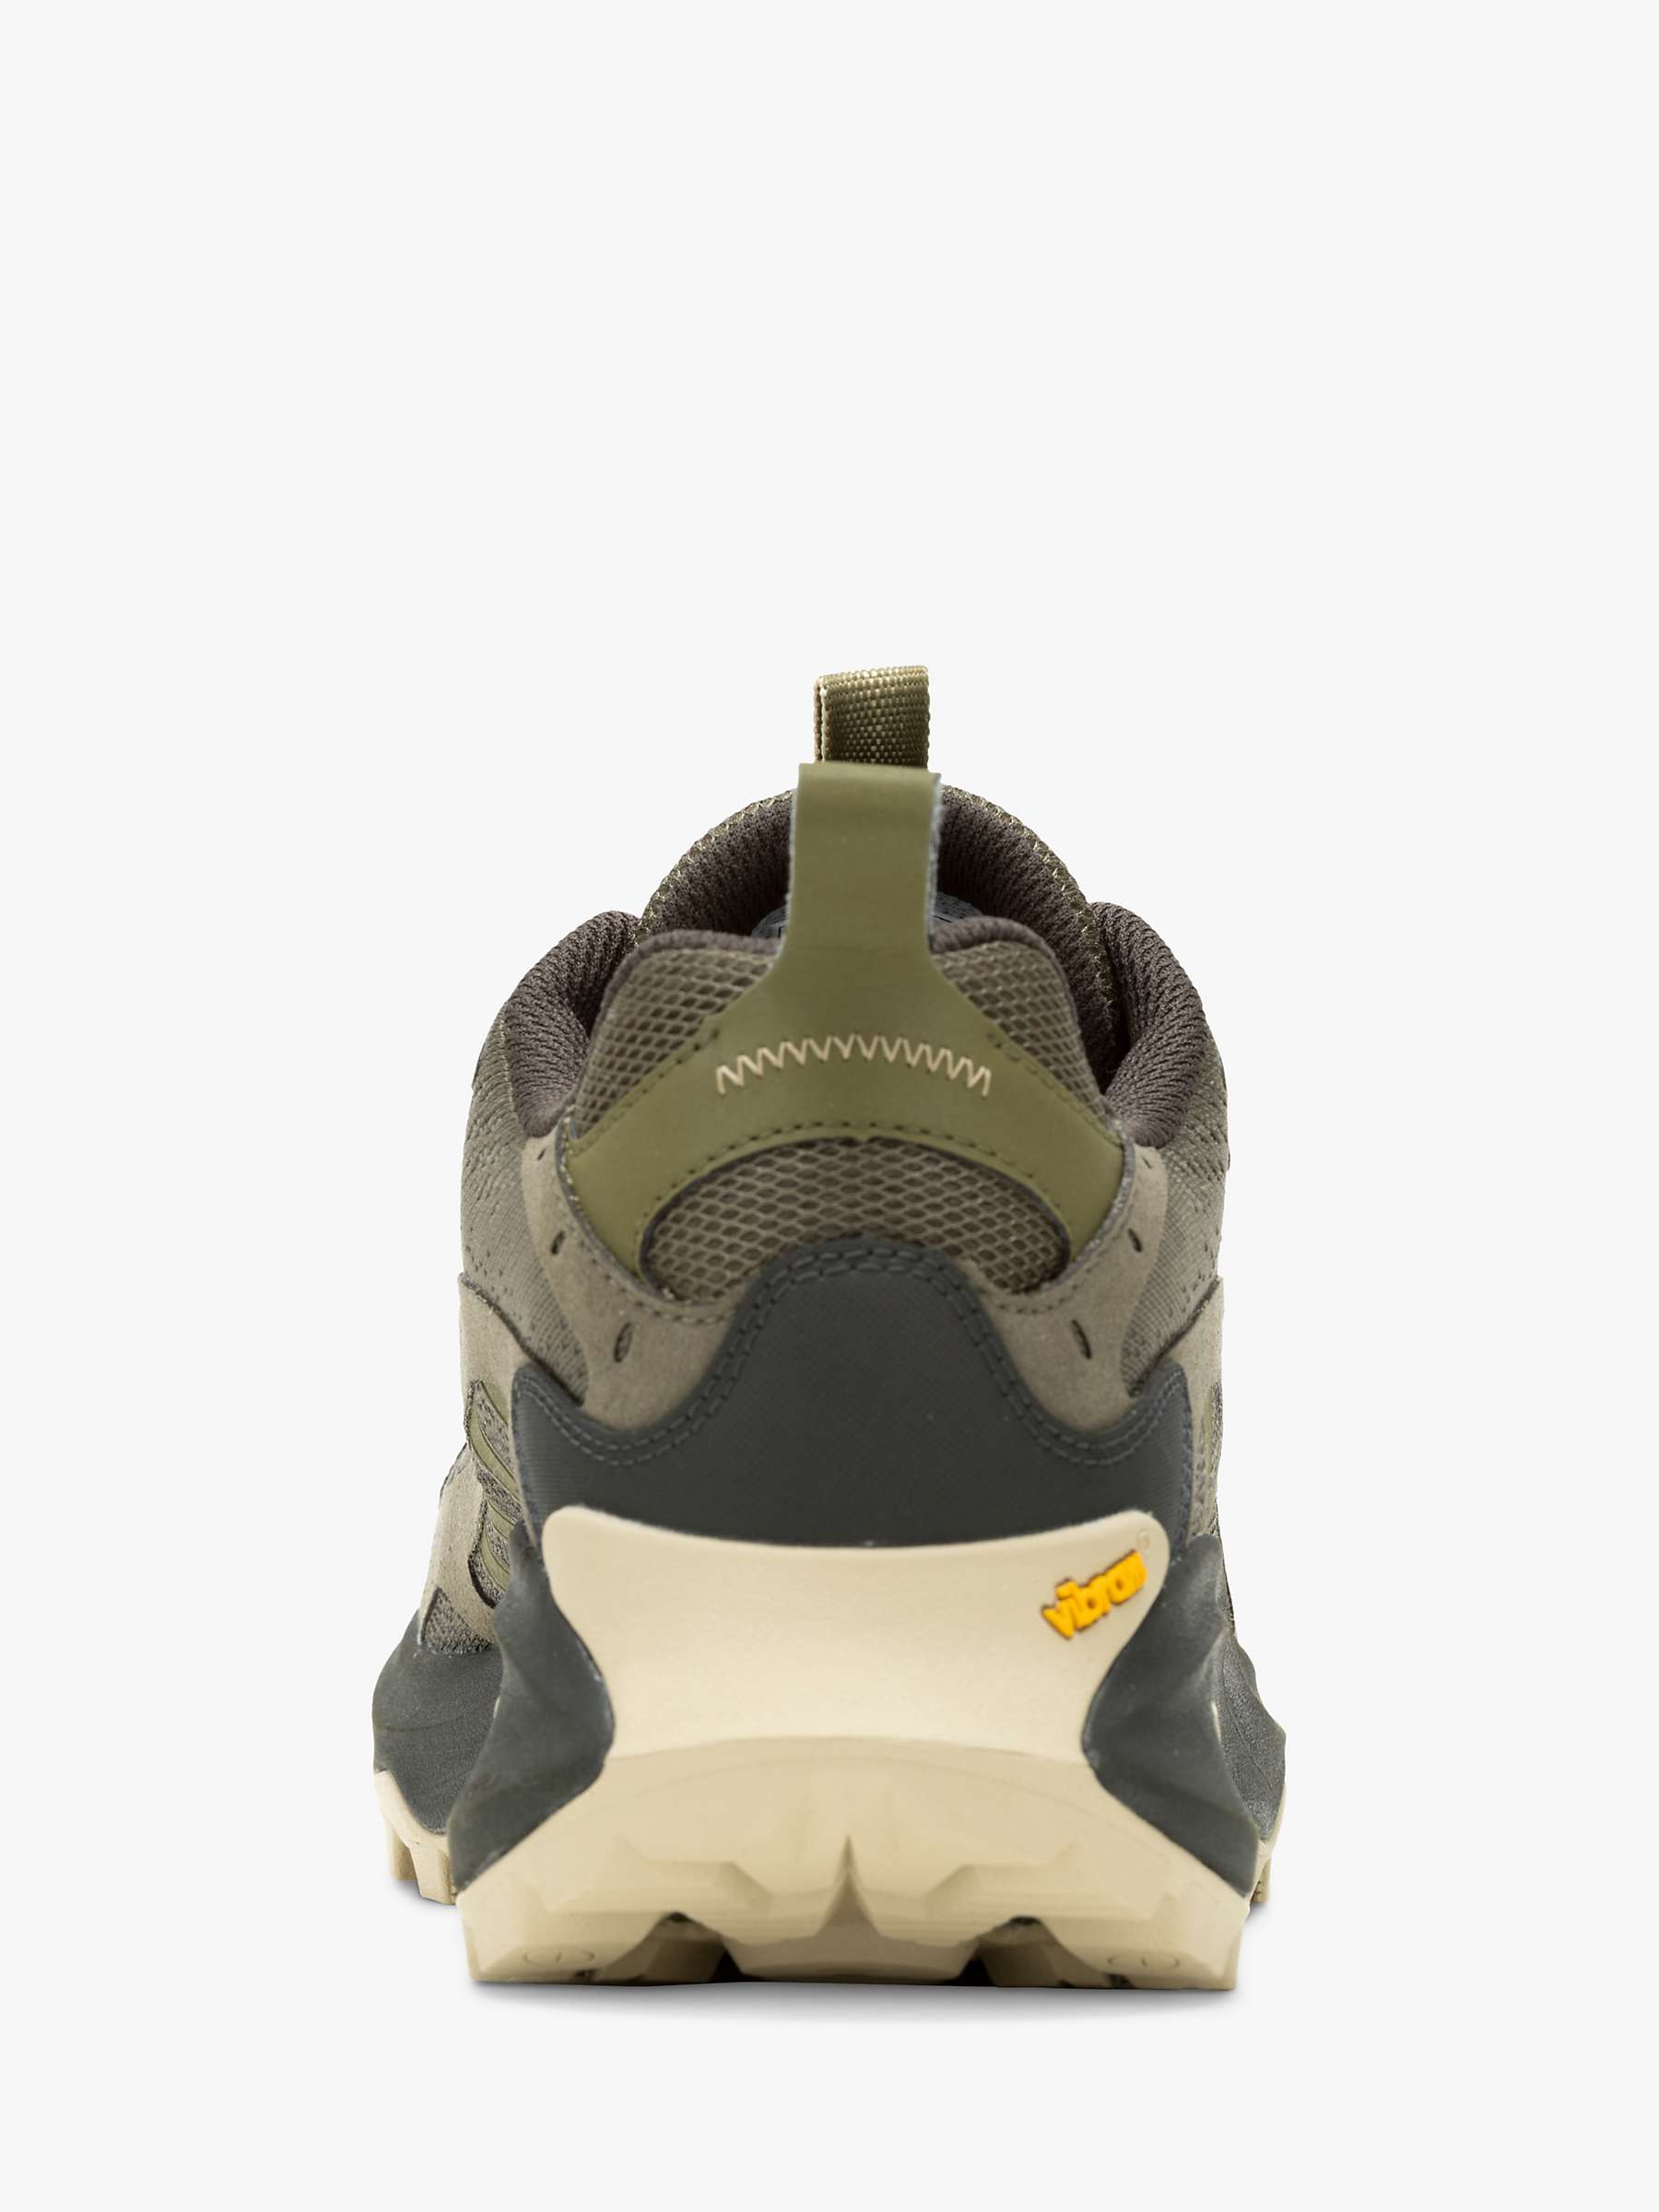 Buy Merrell Moab Speed 2 Men's Sports Shoes, Olive Online at johnlewis.com